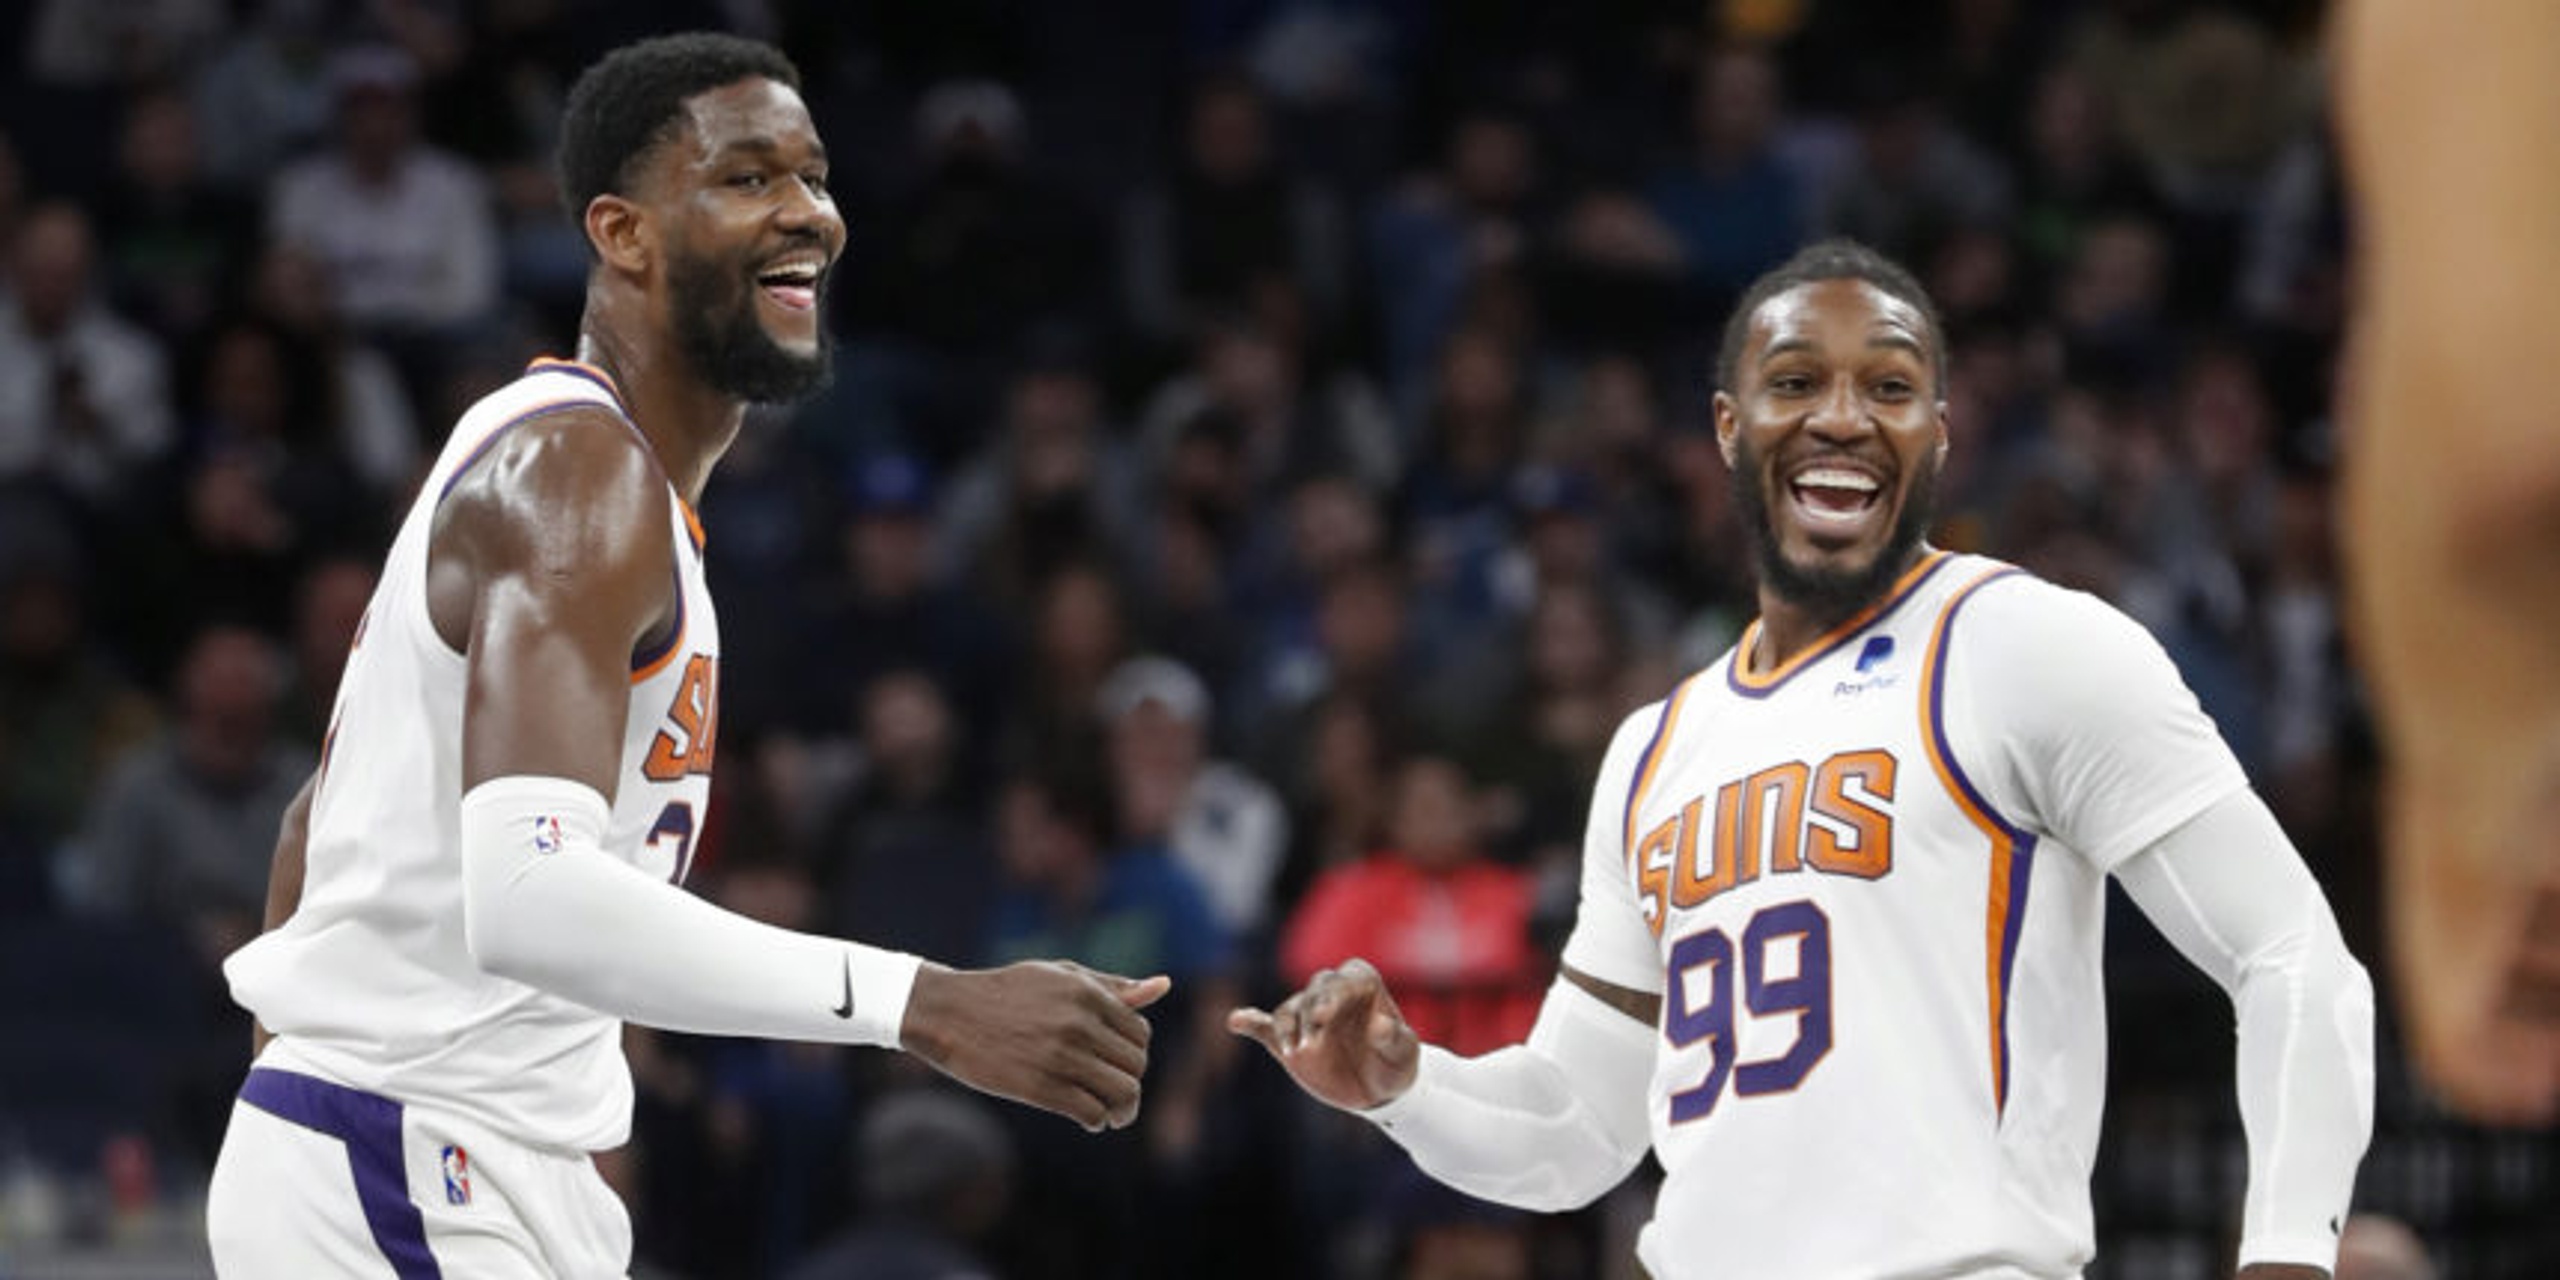 Ayton has career-high 35 points, Suns rally past T-Wolves